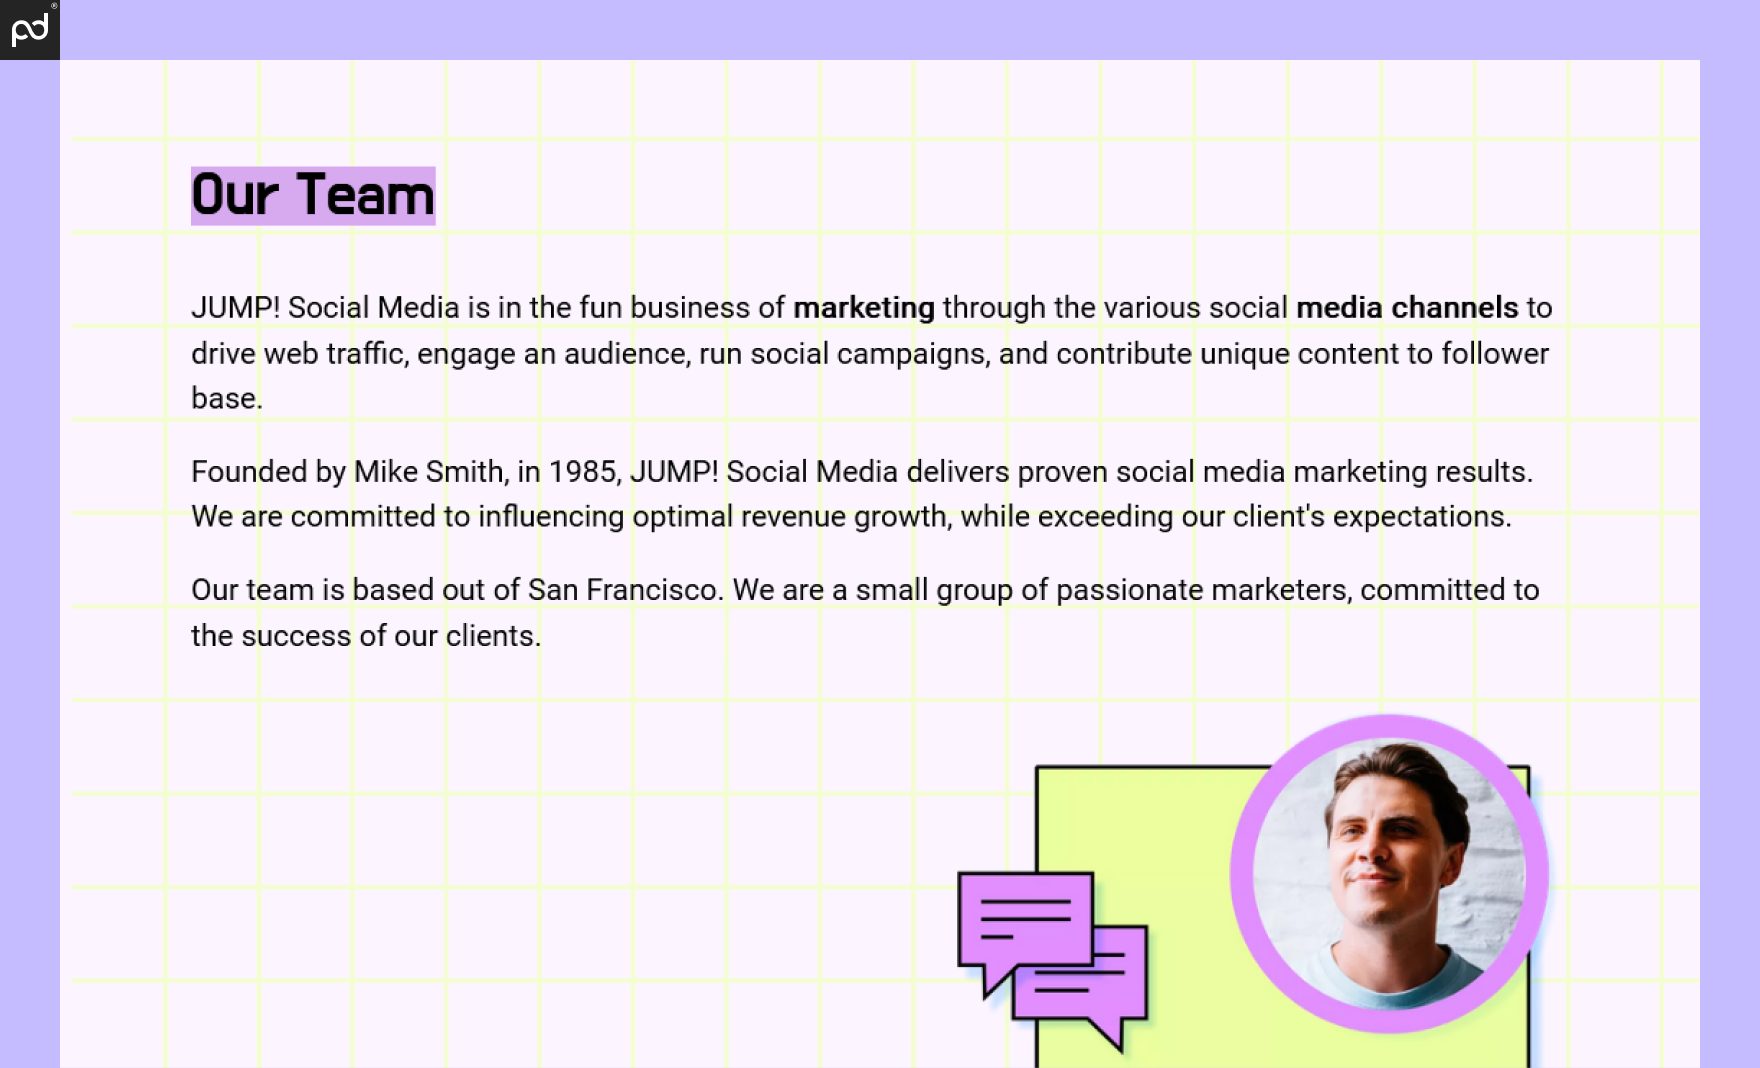 An image showing the “Our Team” section of a proposal, including brief background information and a headshot of the company founder.